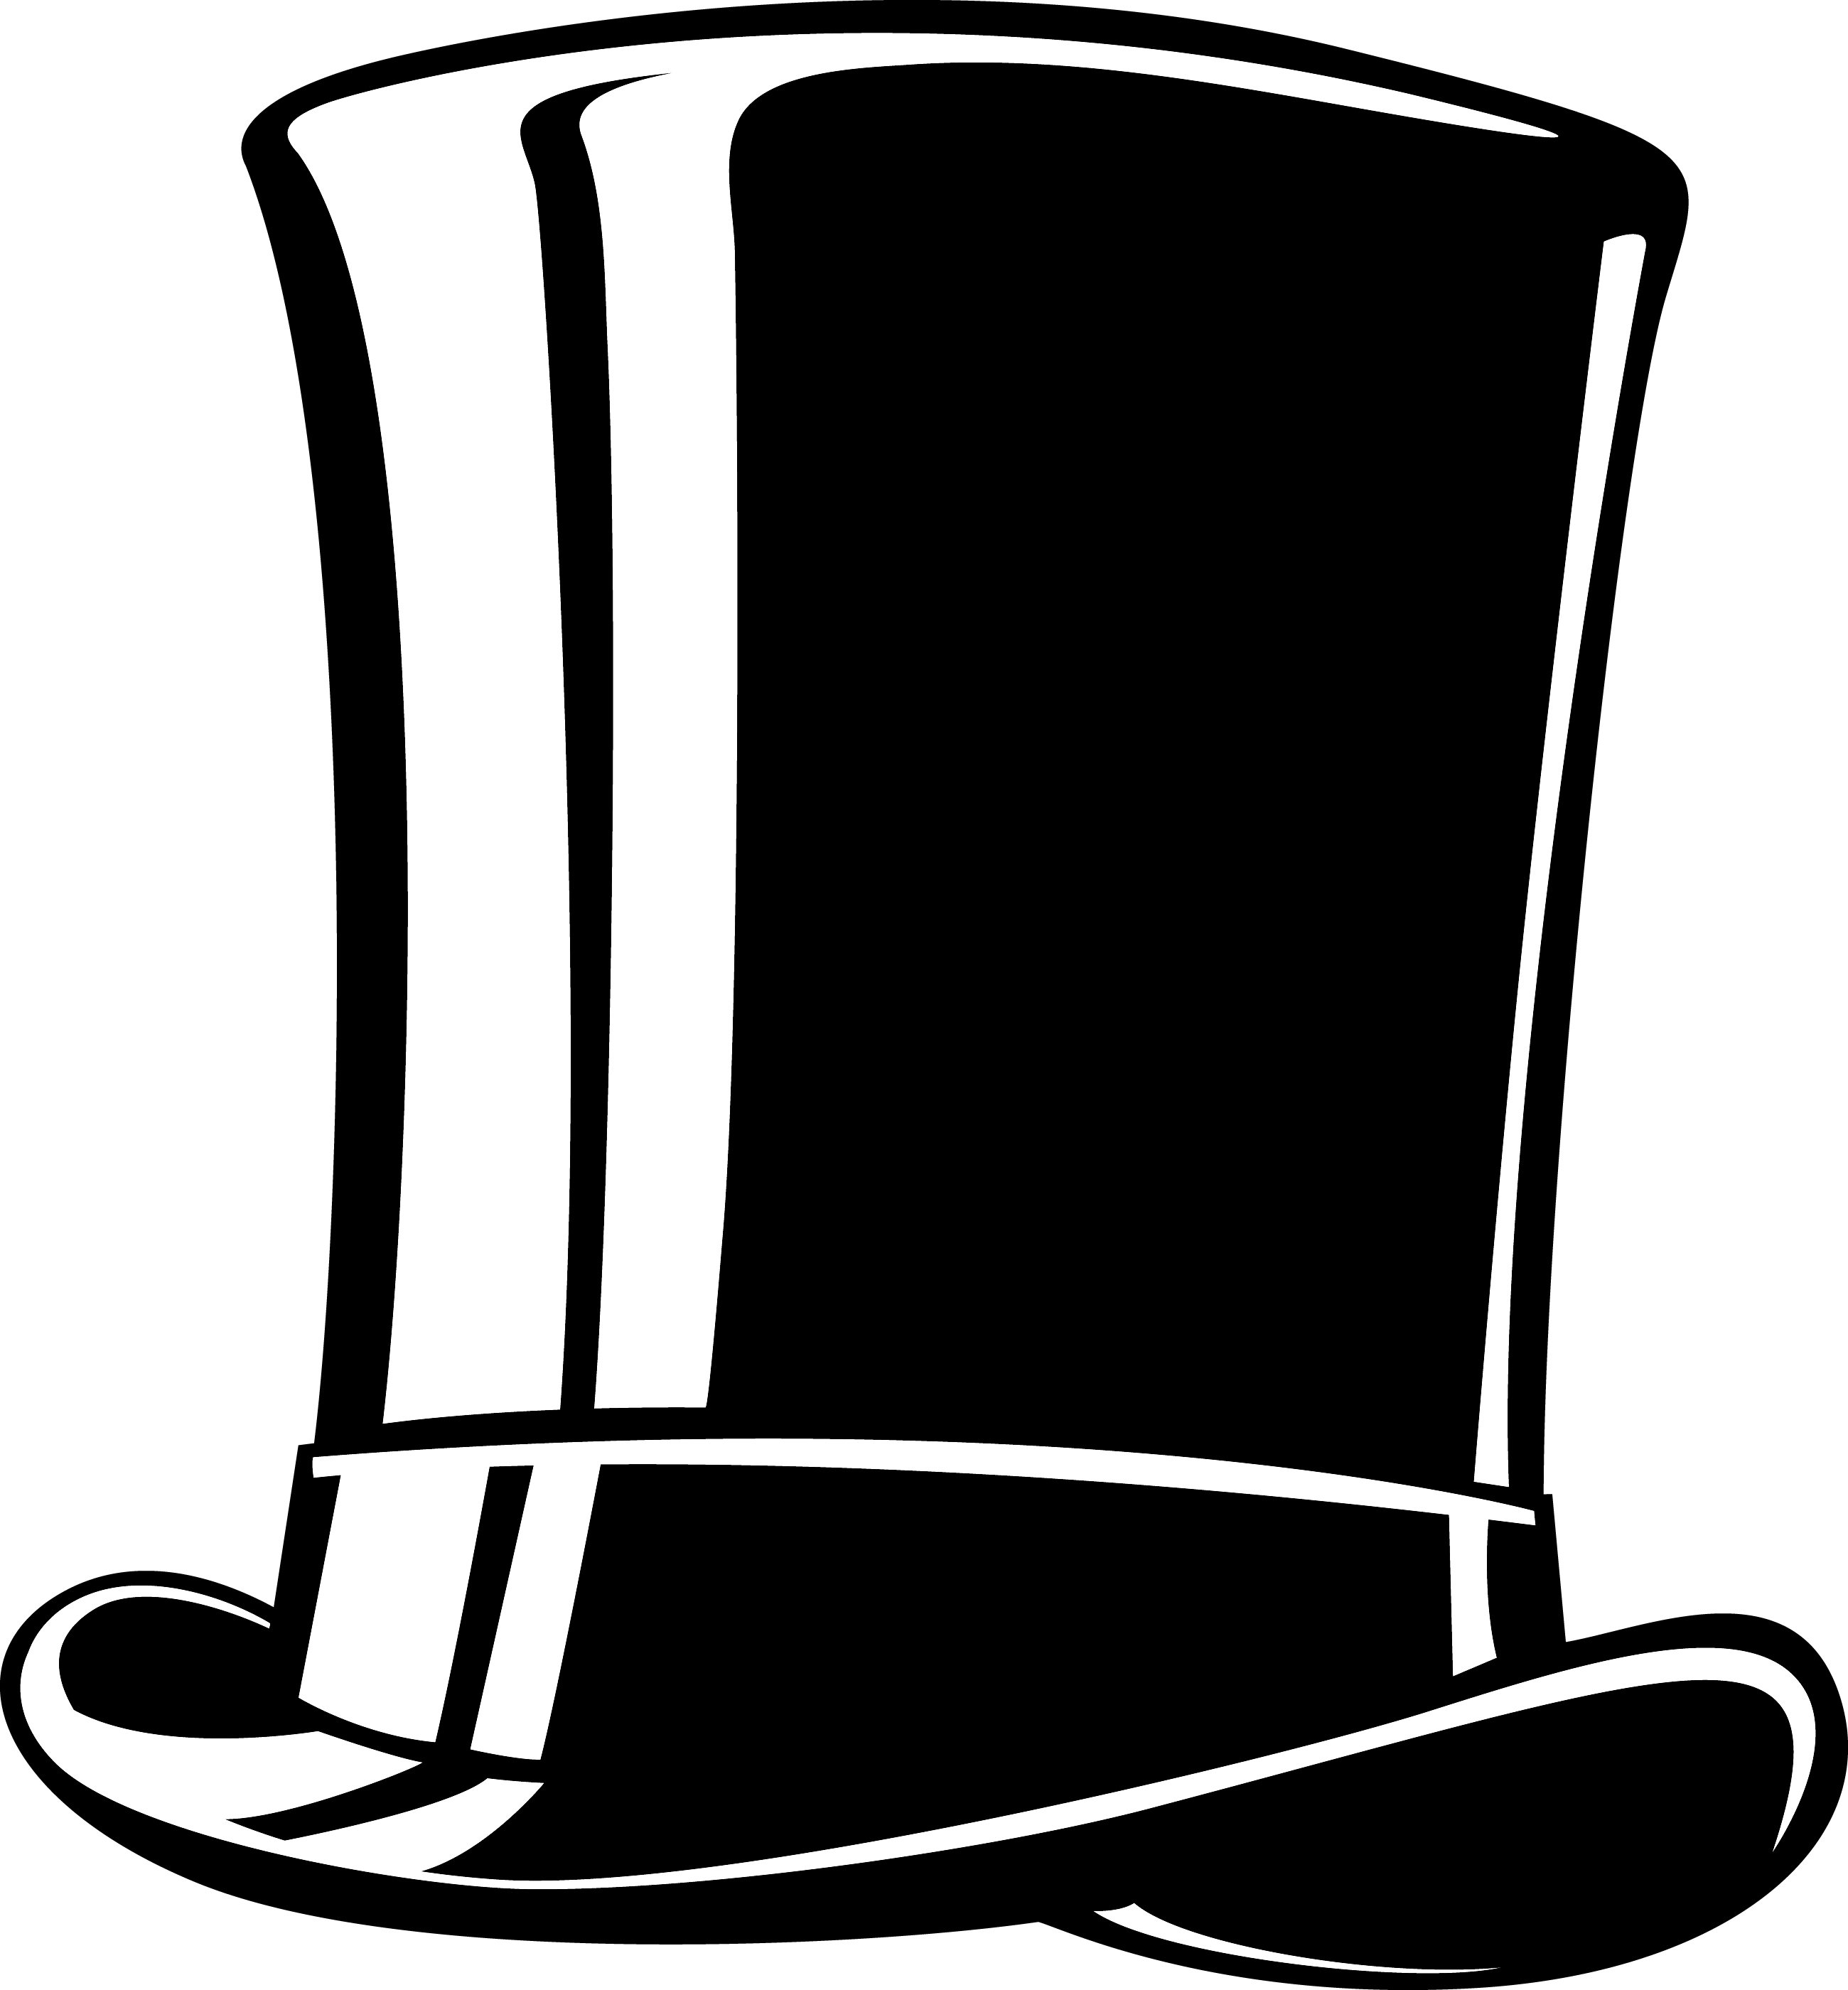 Top Hat Clipart Black And Whi - Top Hat Clipart